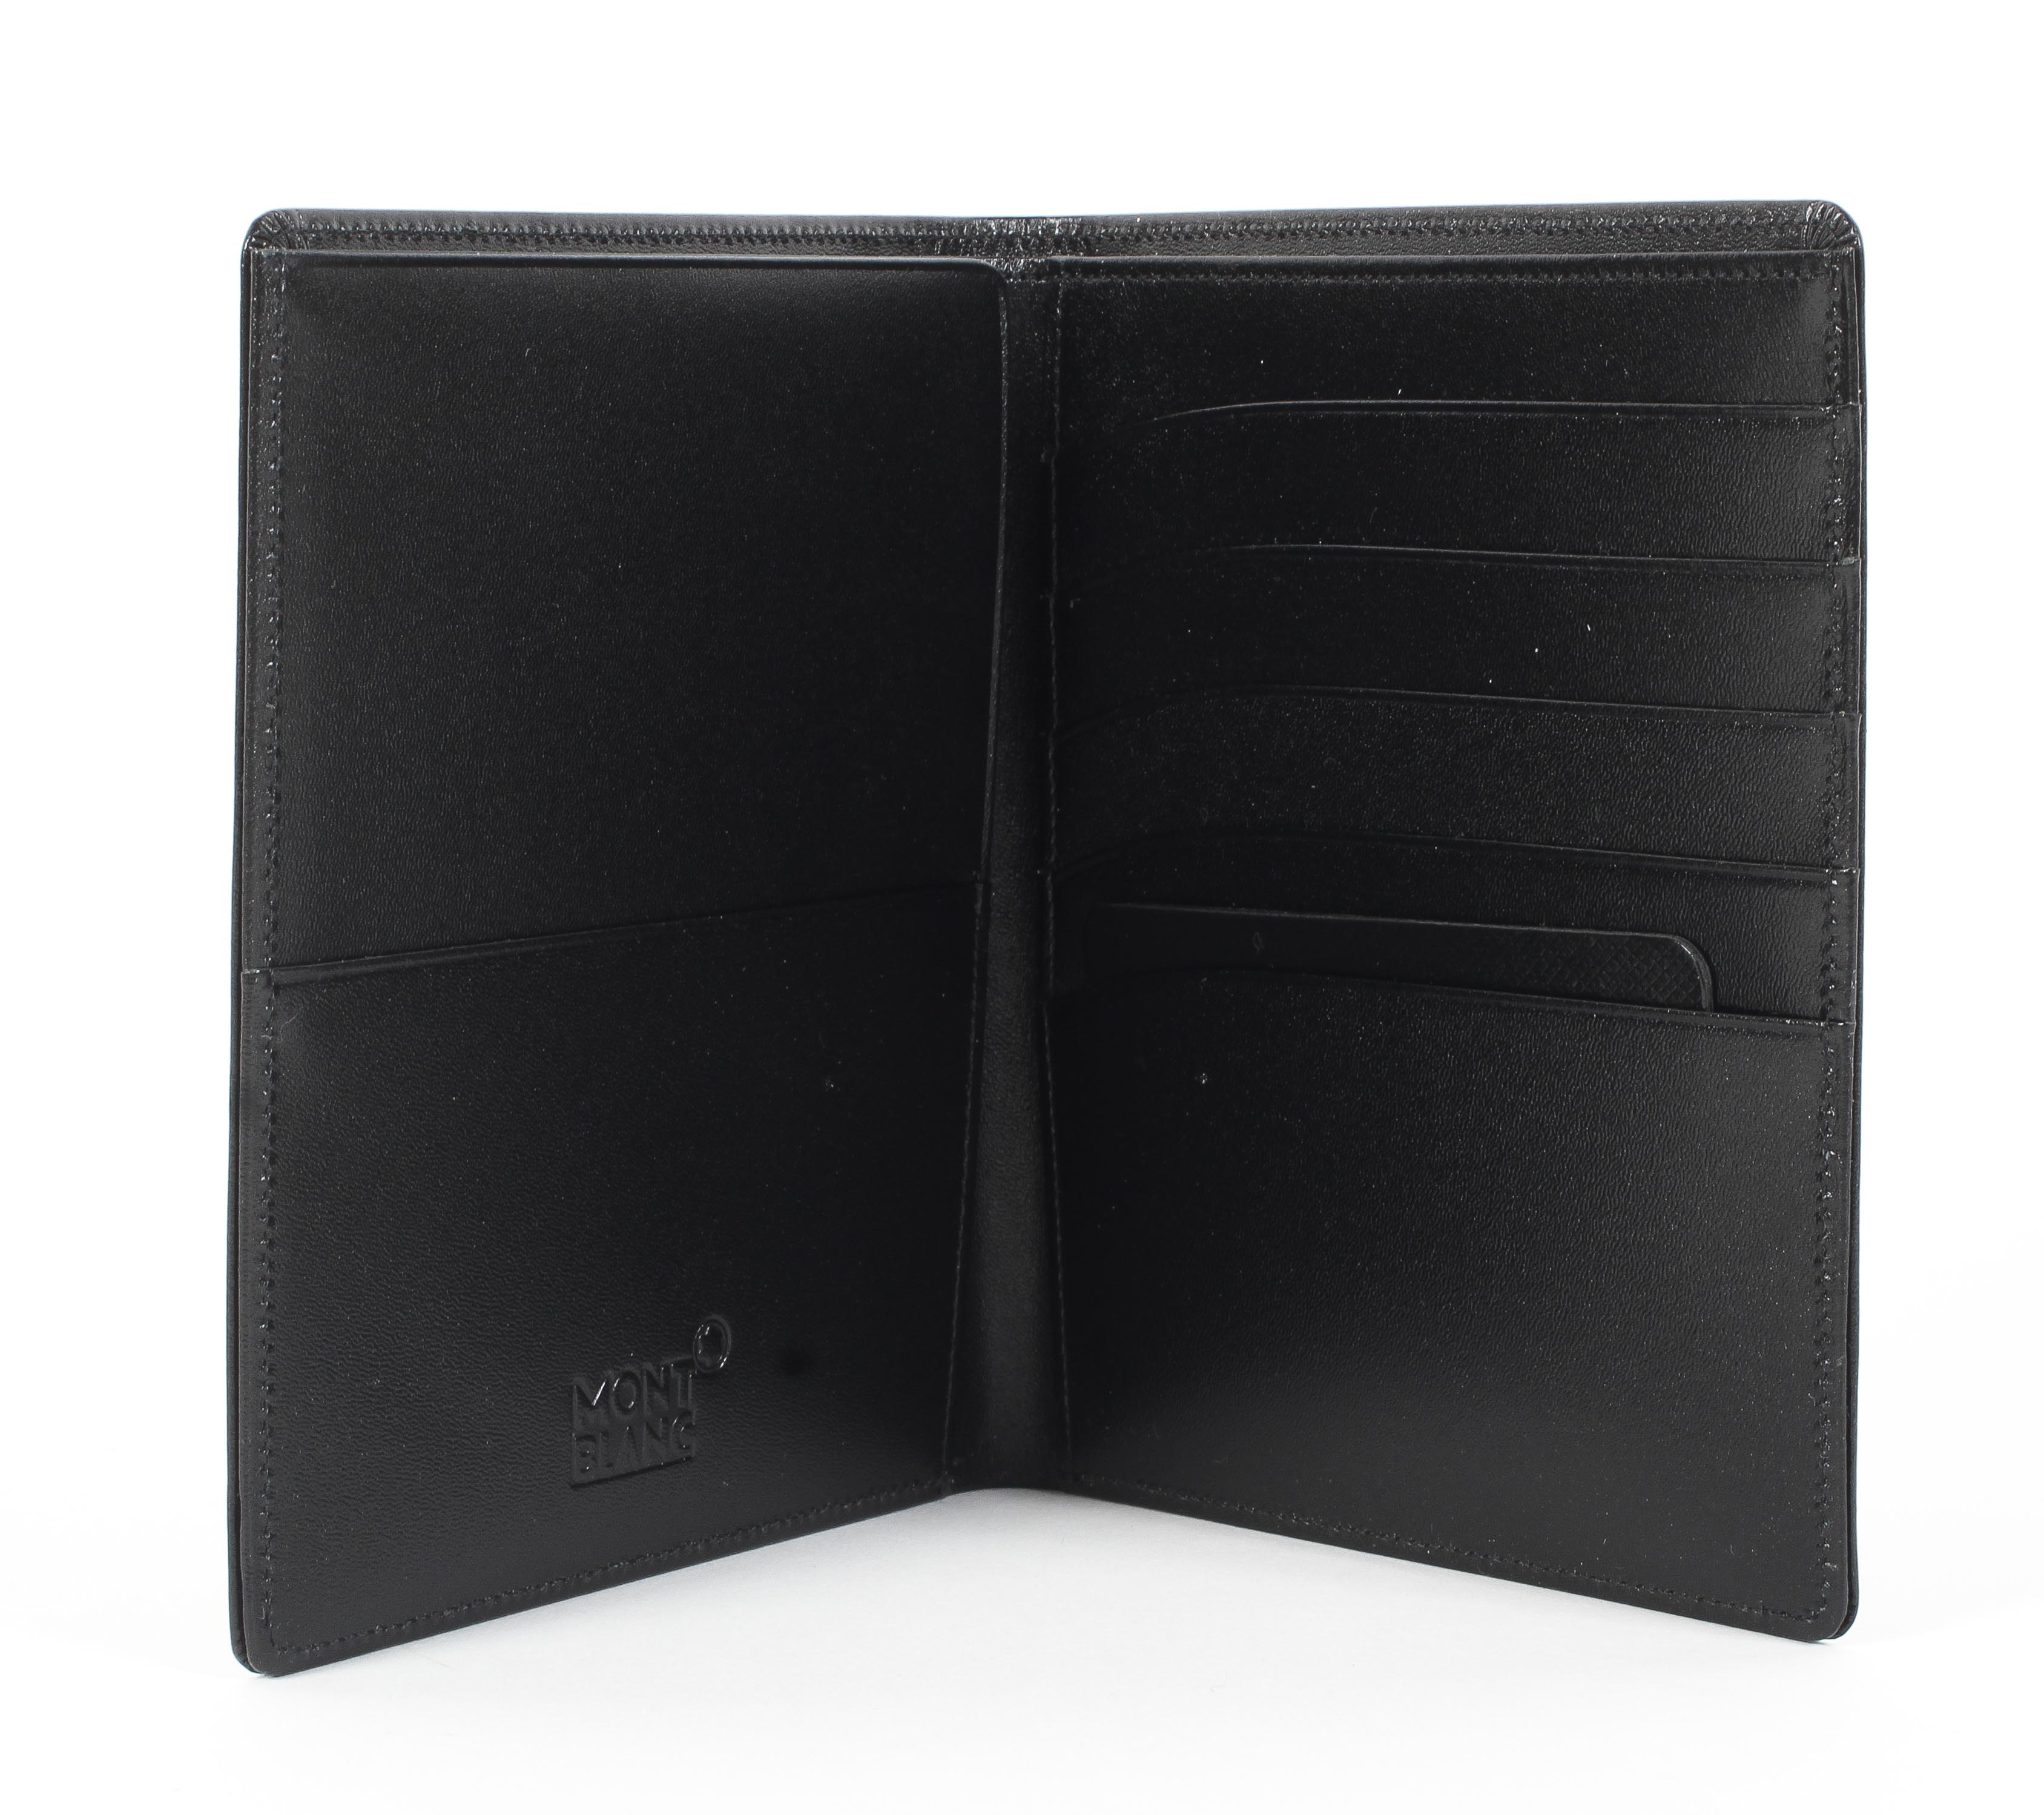 A Mont blanc leather credit card holder - Image 2 of 3